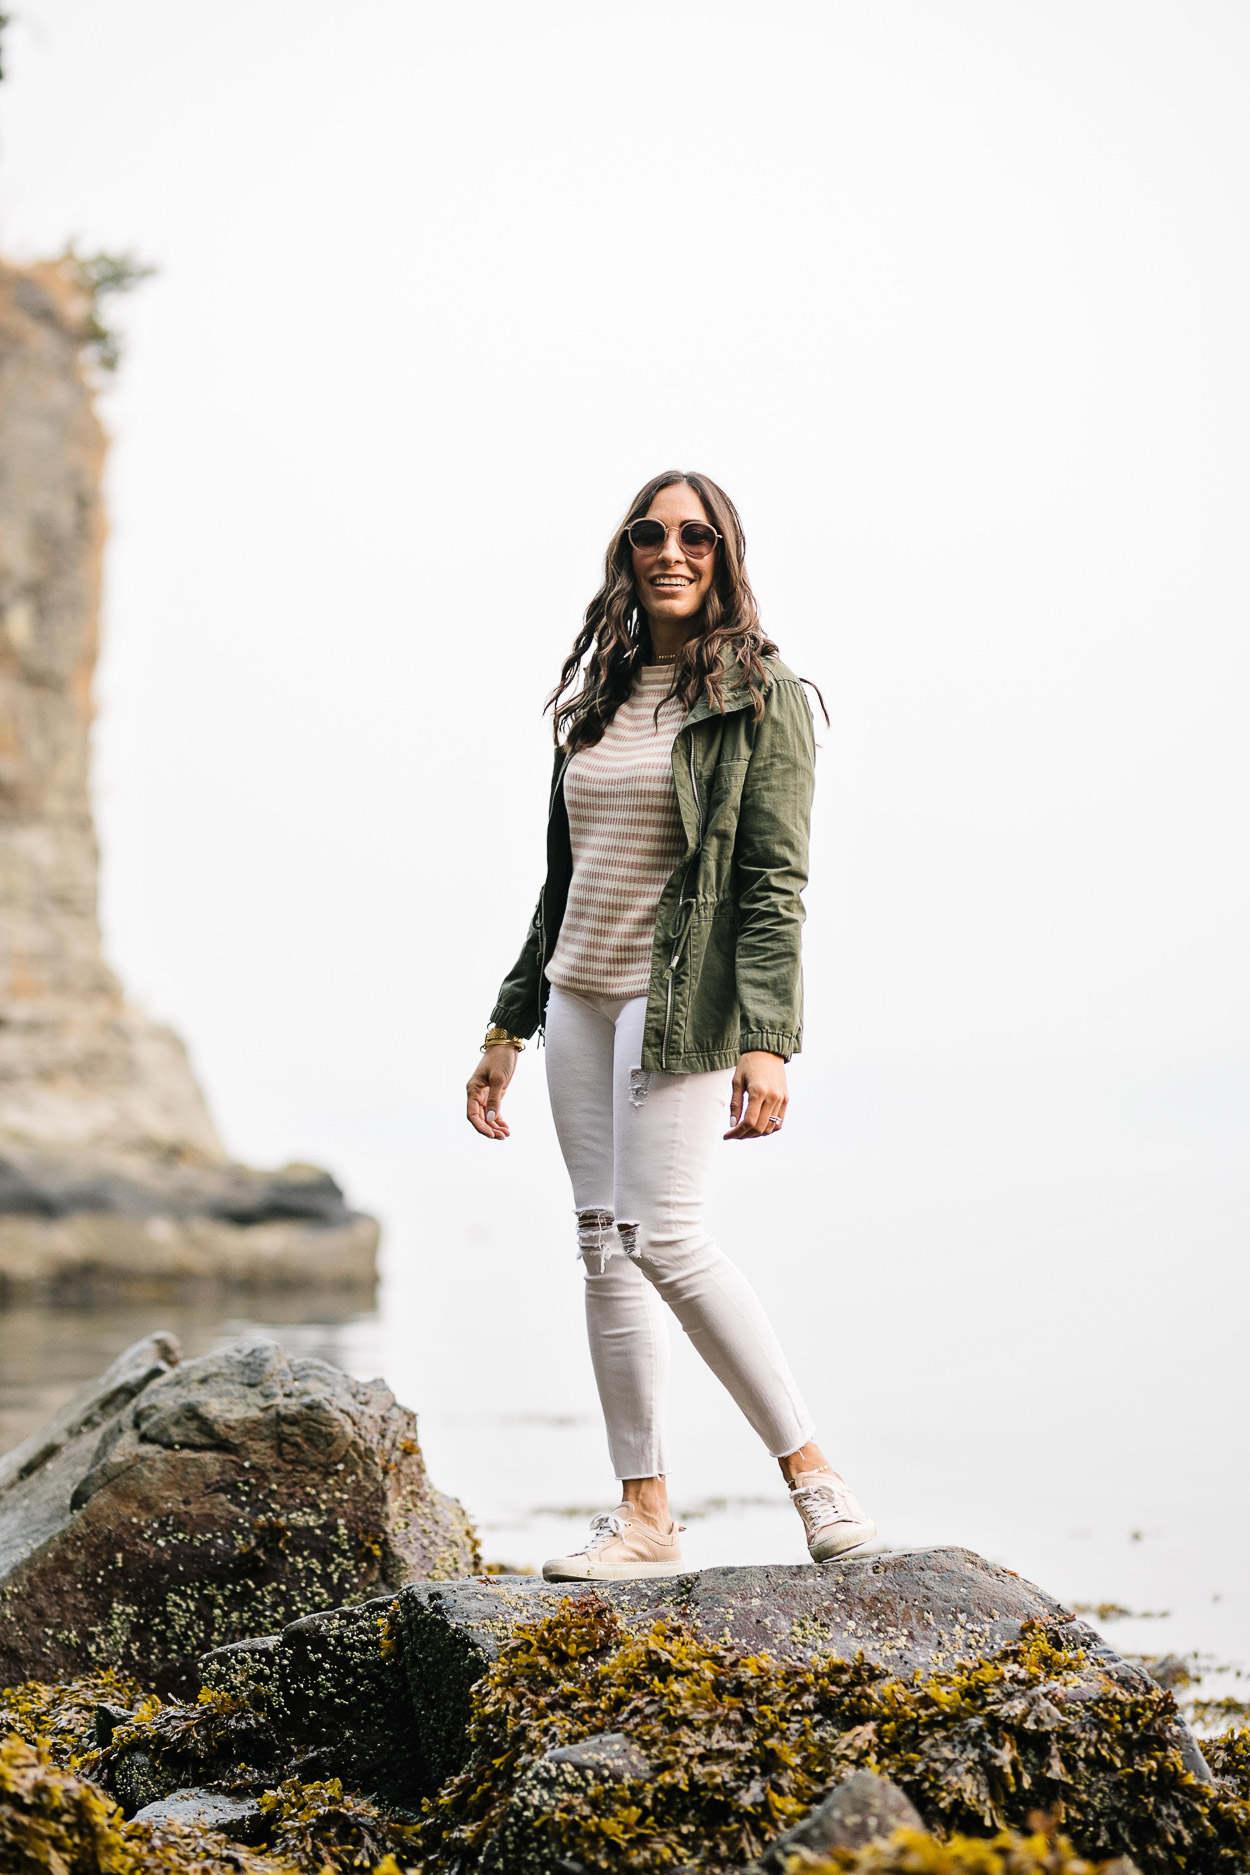 JCrew striped sweater is always affordable fall fashion as styled by AGlamLifestyle blogger Amanda in Vancouver at Siwash Rock